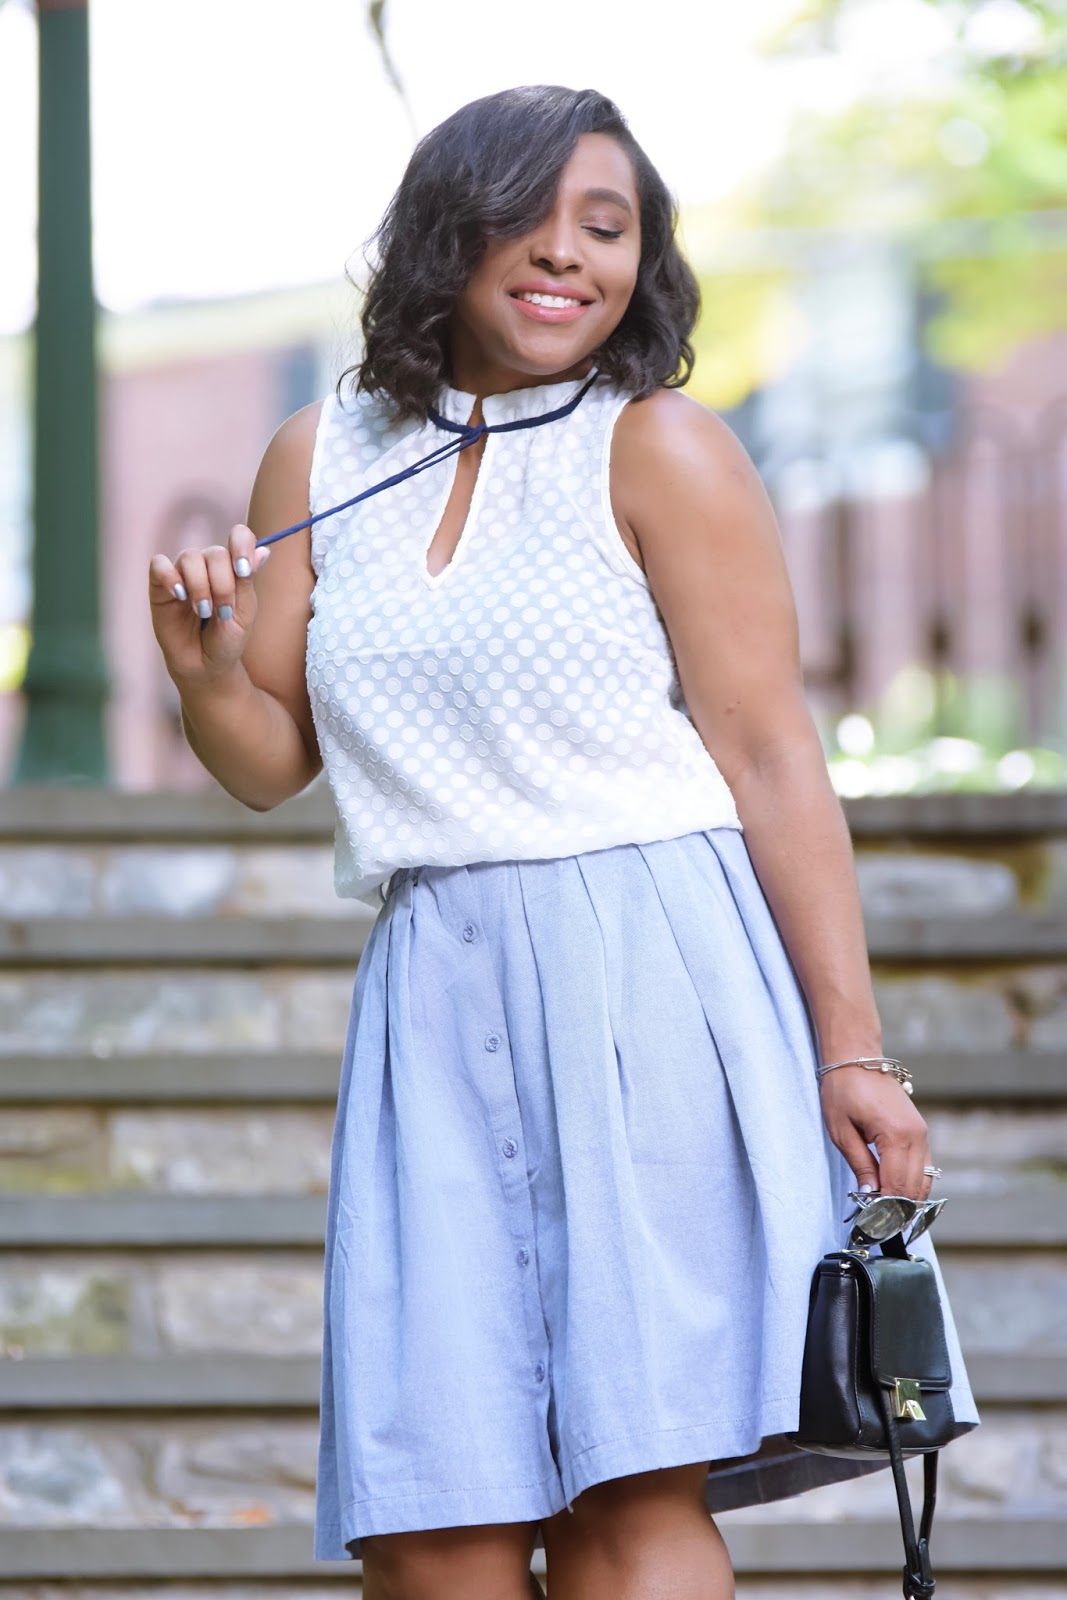 Modcloth, Modclothsquad, prefall, full skirt, midi skirt, armandhugon, dominican bloggers, dc bloggers, streetstyle, fall outfit ideas, necktie blouse